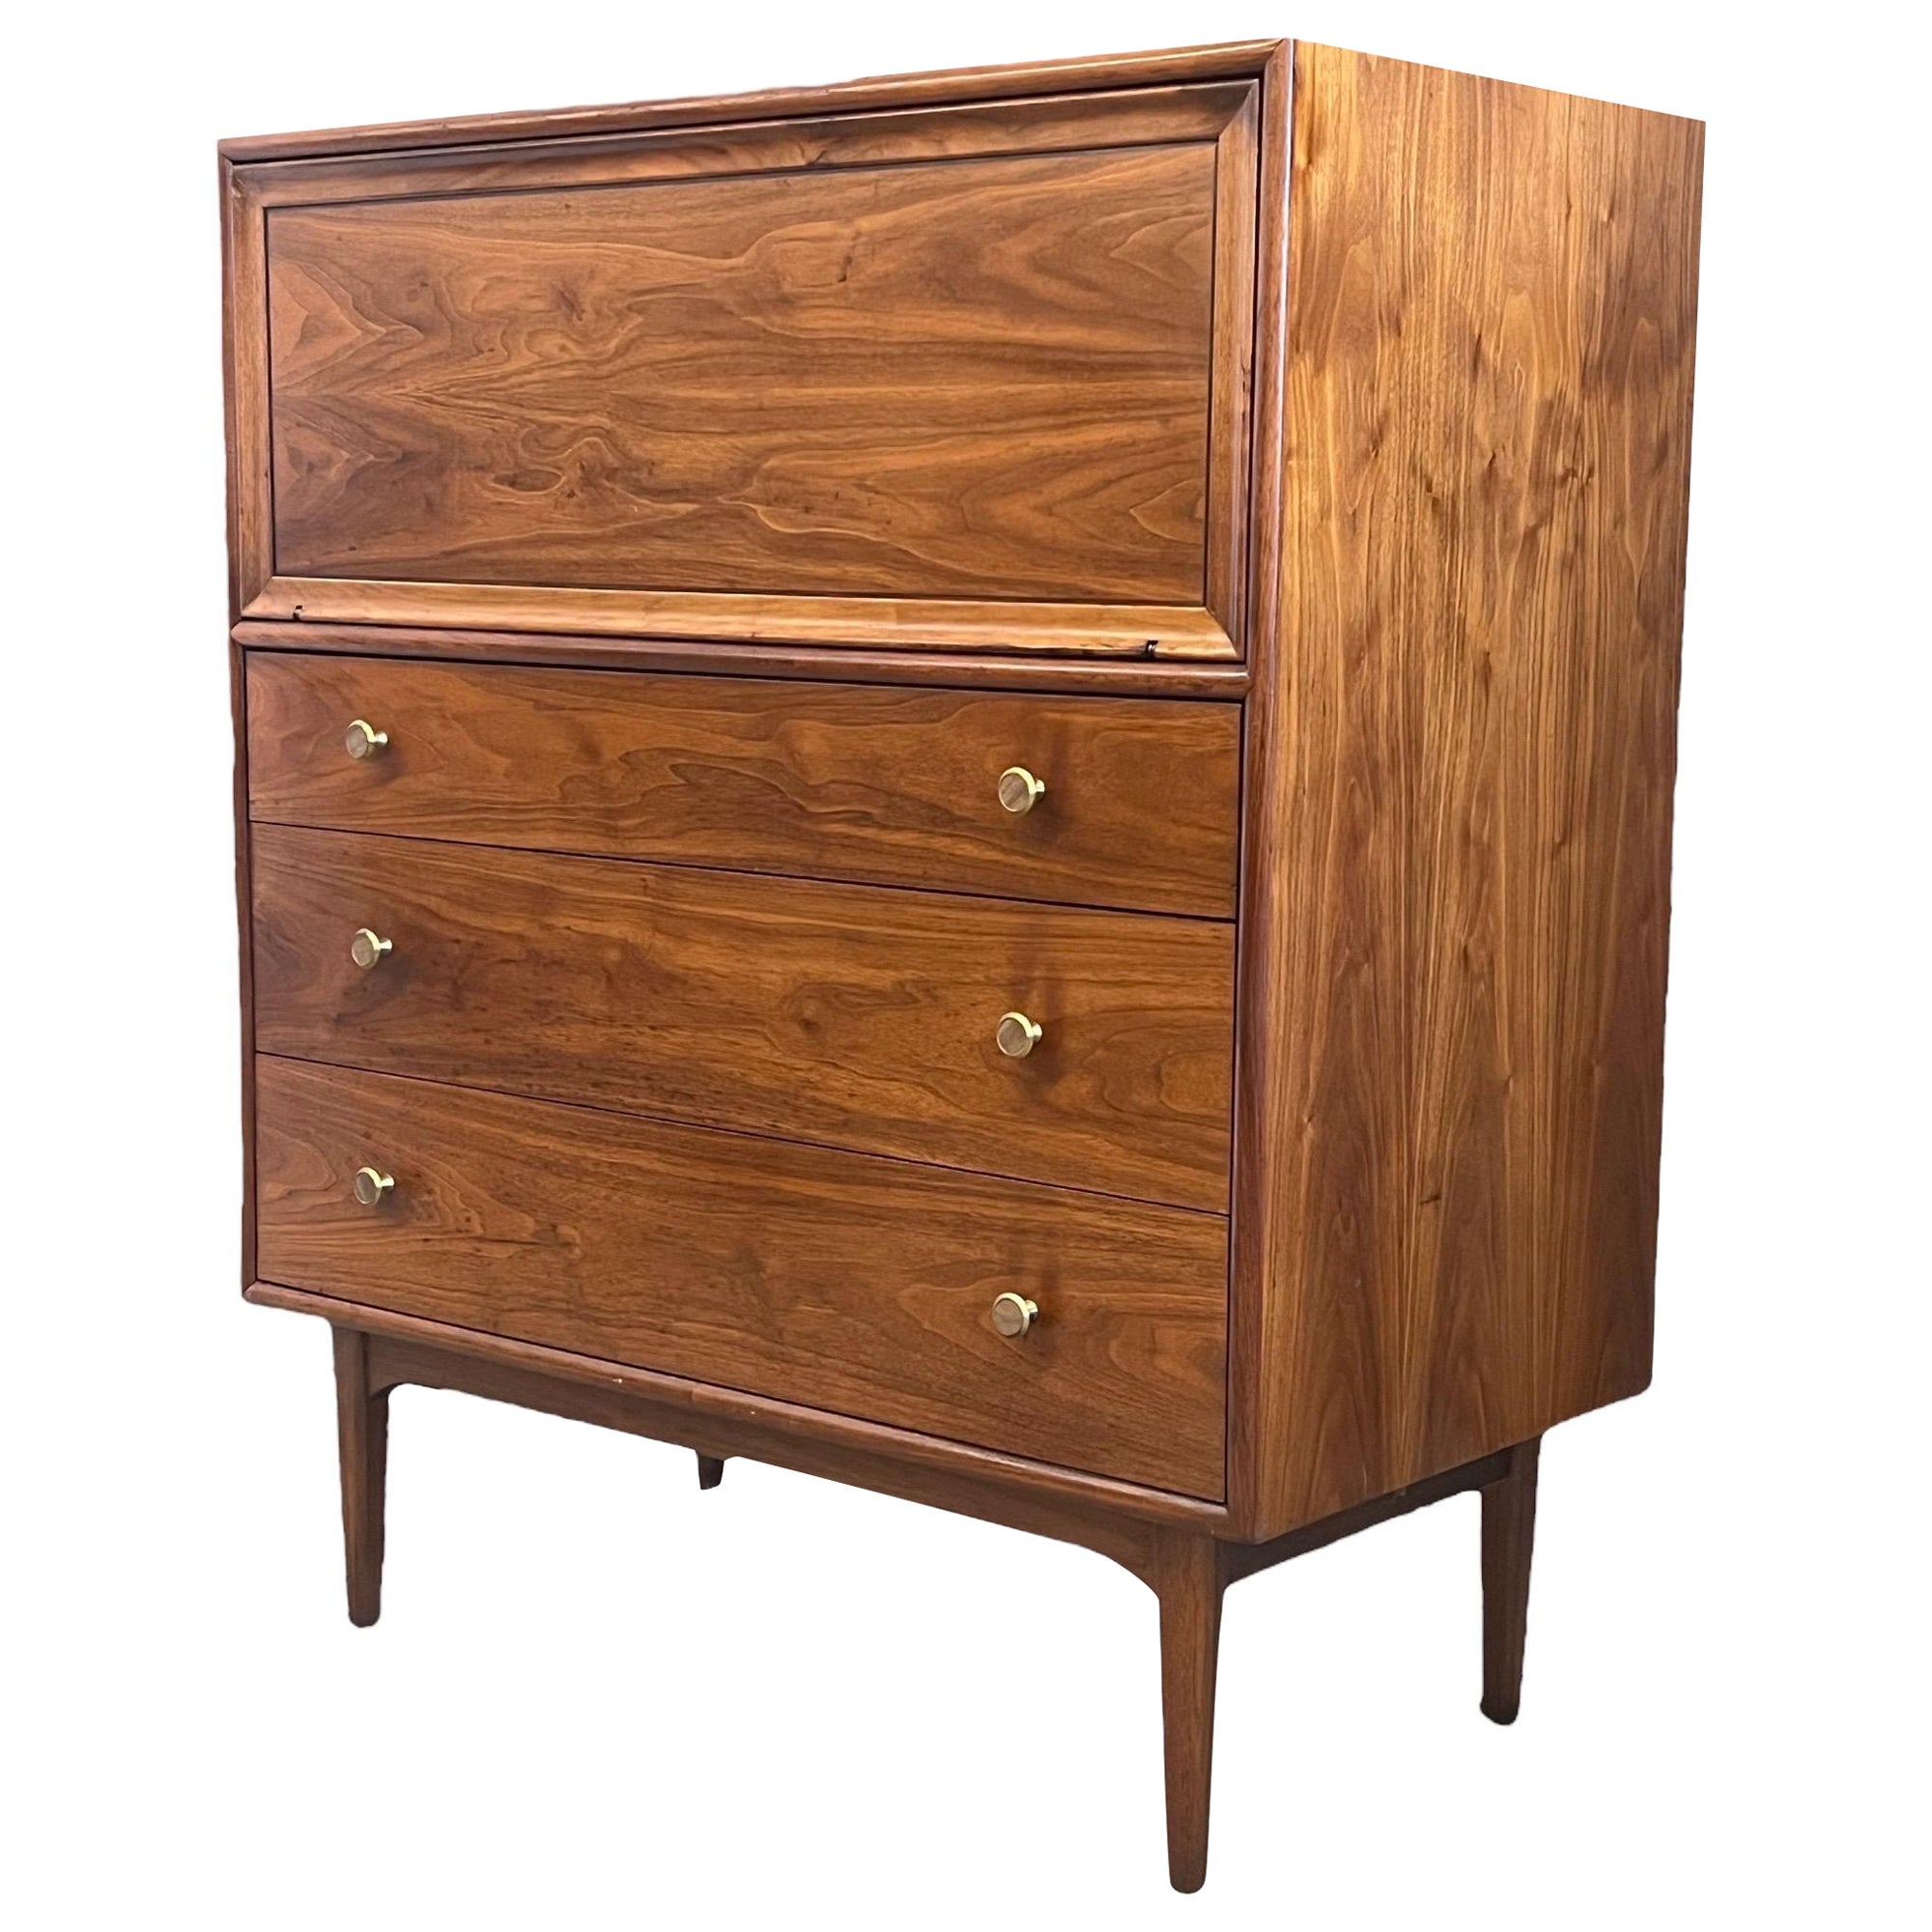 Vintage Mid Century Modern 5 Drawer Dresser Dovetail Drawers by Drexel . For Sale